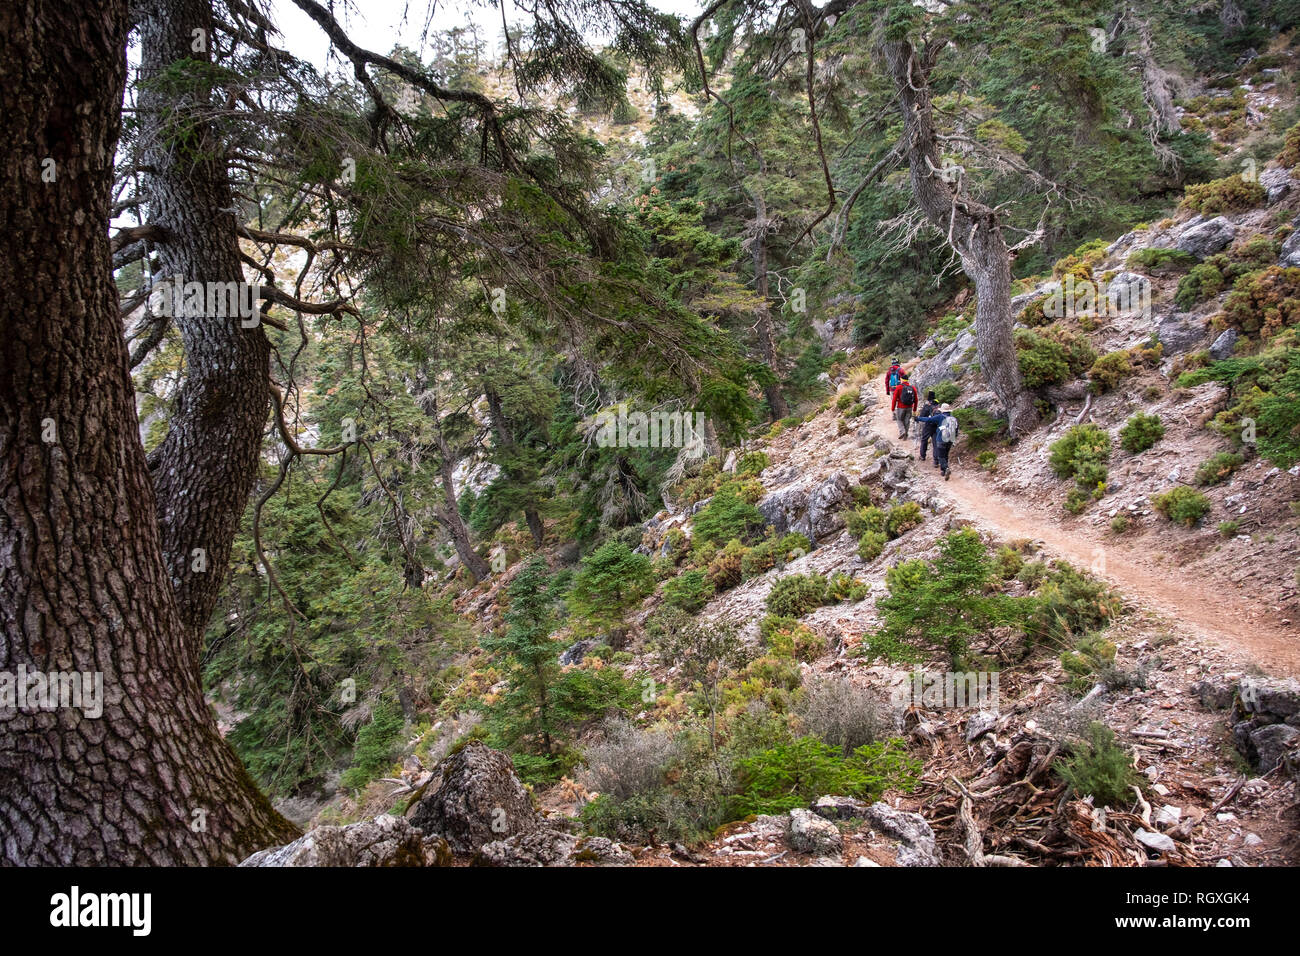 Hiking in nature. Biosphere Reserve. Natural Park Sierra de las Nieves. Spanish Fir Abies pinsapo. Ronda, Malaga province. Andalusia, Southern Spain.  Stock Photo